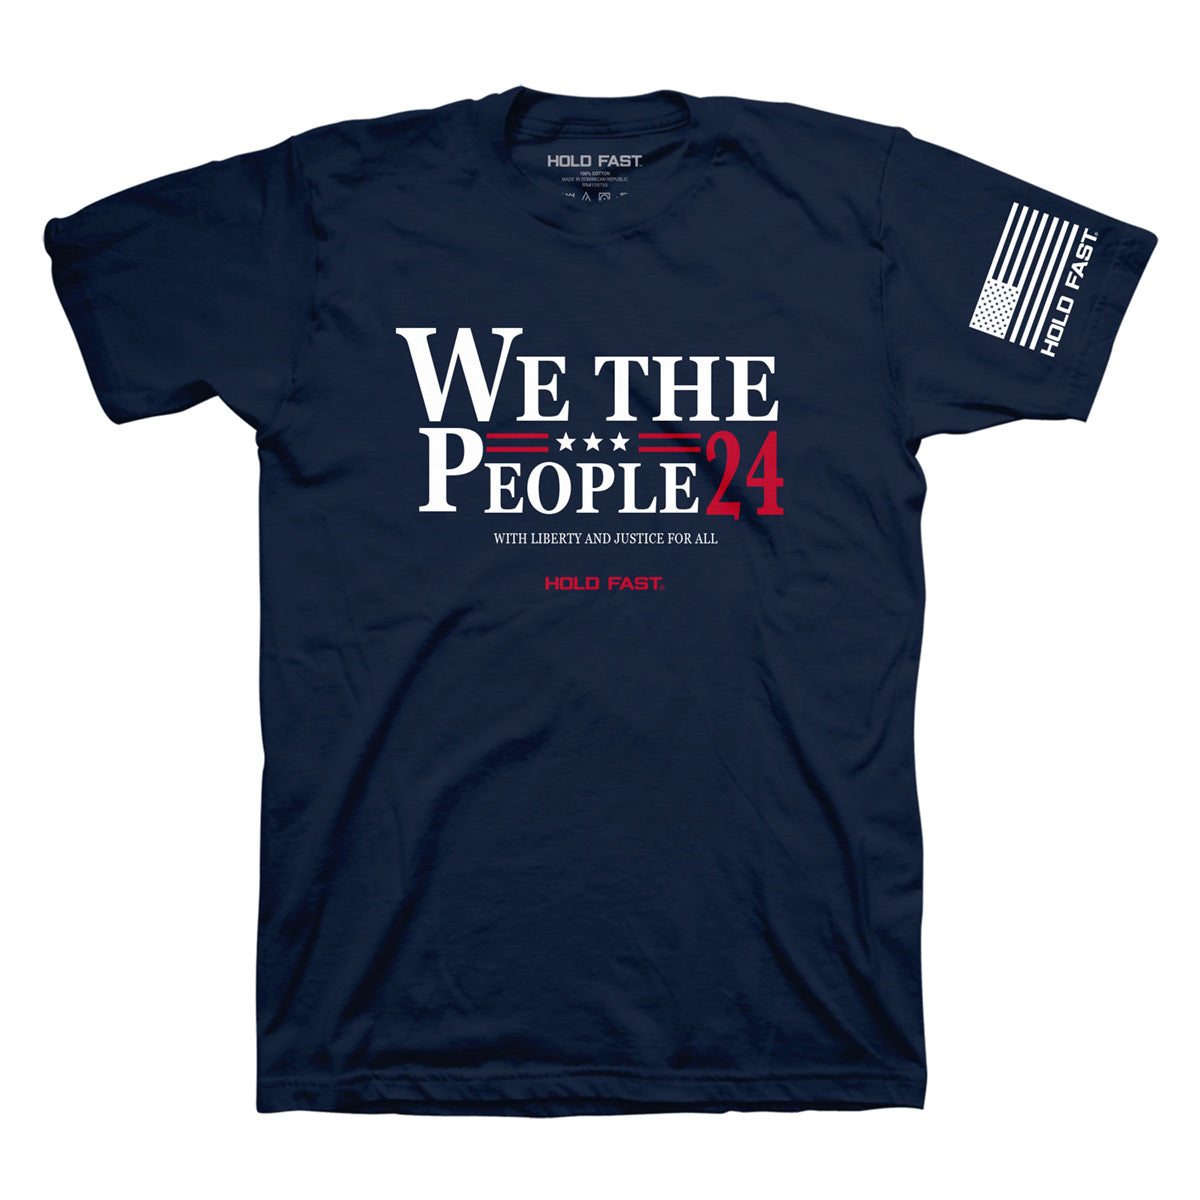 We The People 24 Mens T-Shirt